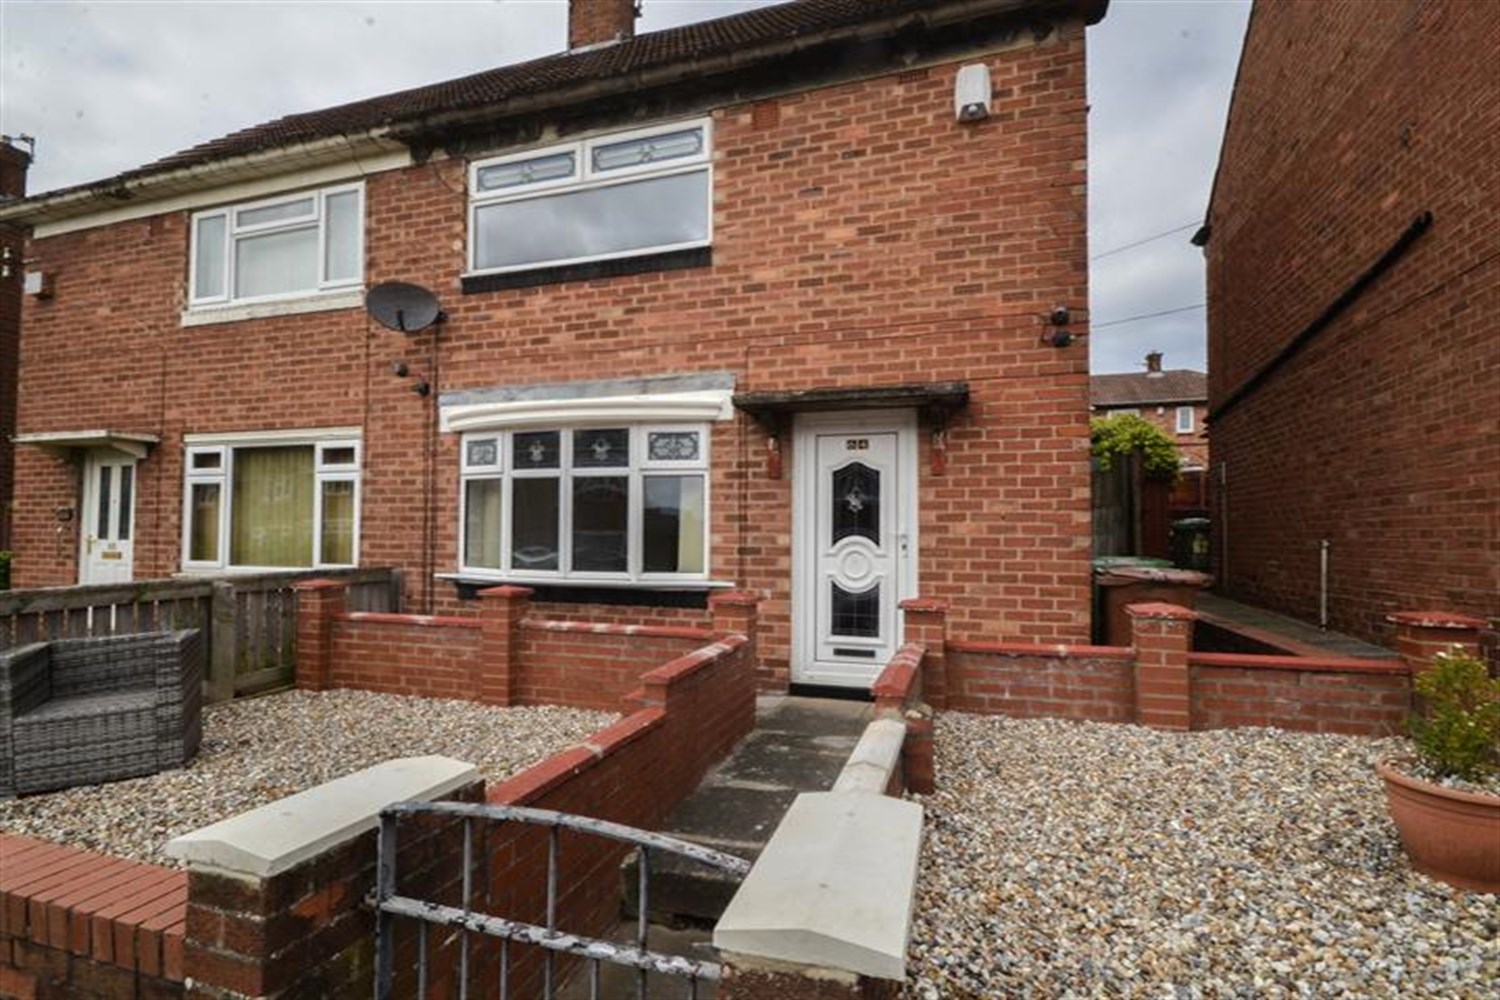 2 bed semi-detached house for sale in Clovelly Road, Sunderland - Property Image 1